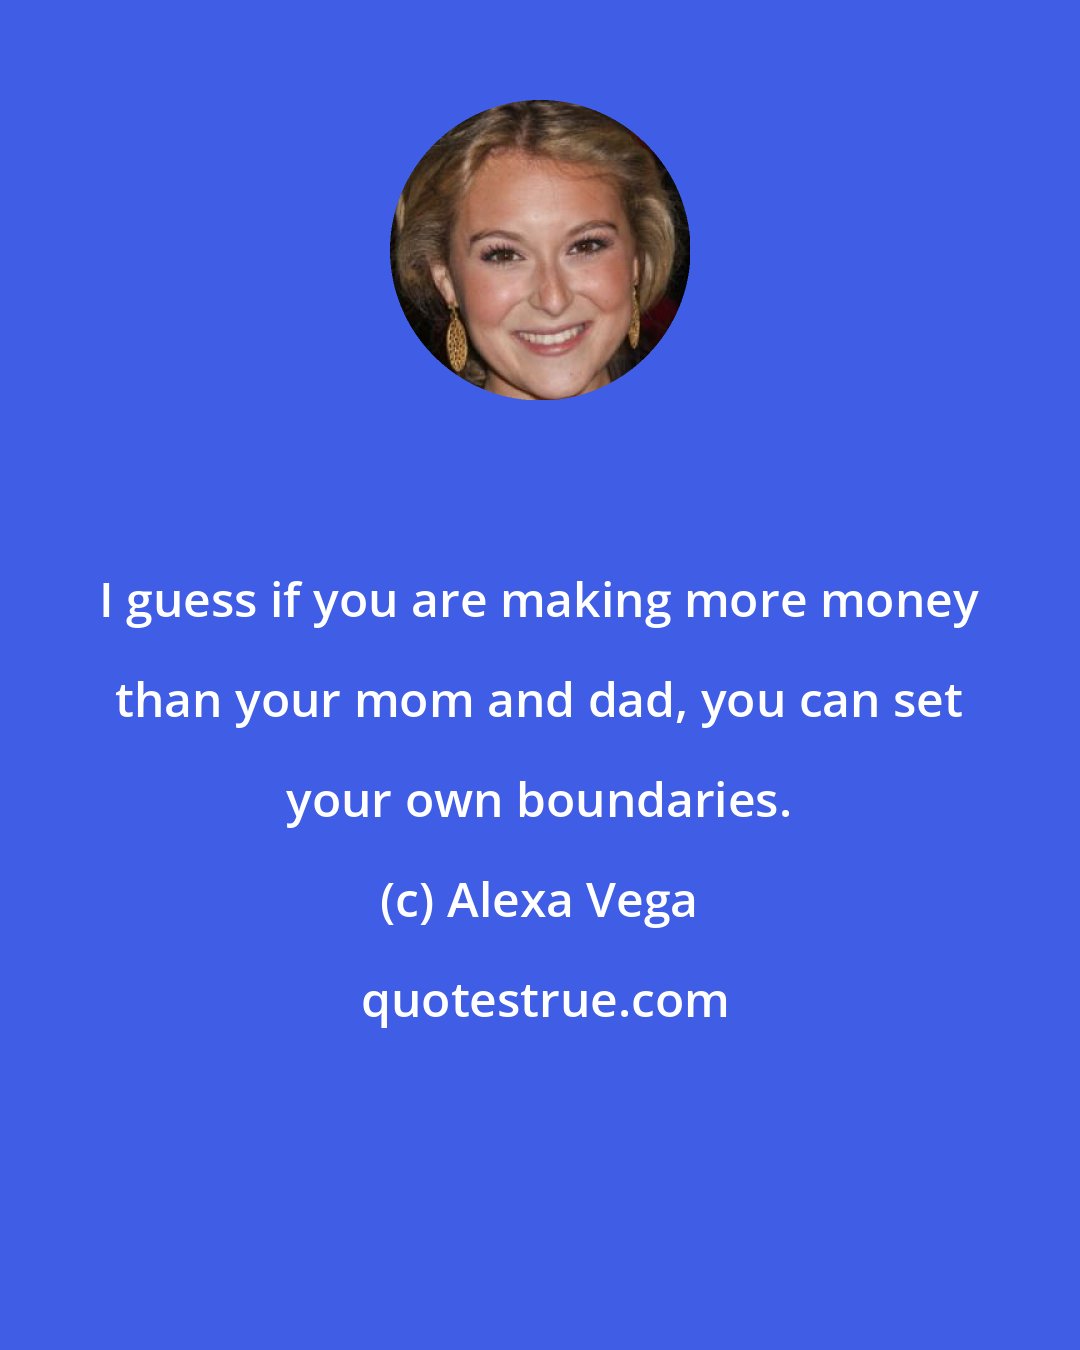 Alexa Vega: I guess if you are making more money than your mom and dad, you can set your own boundaries.